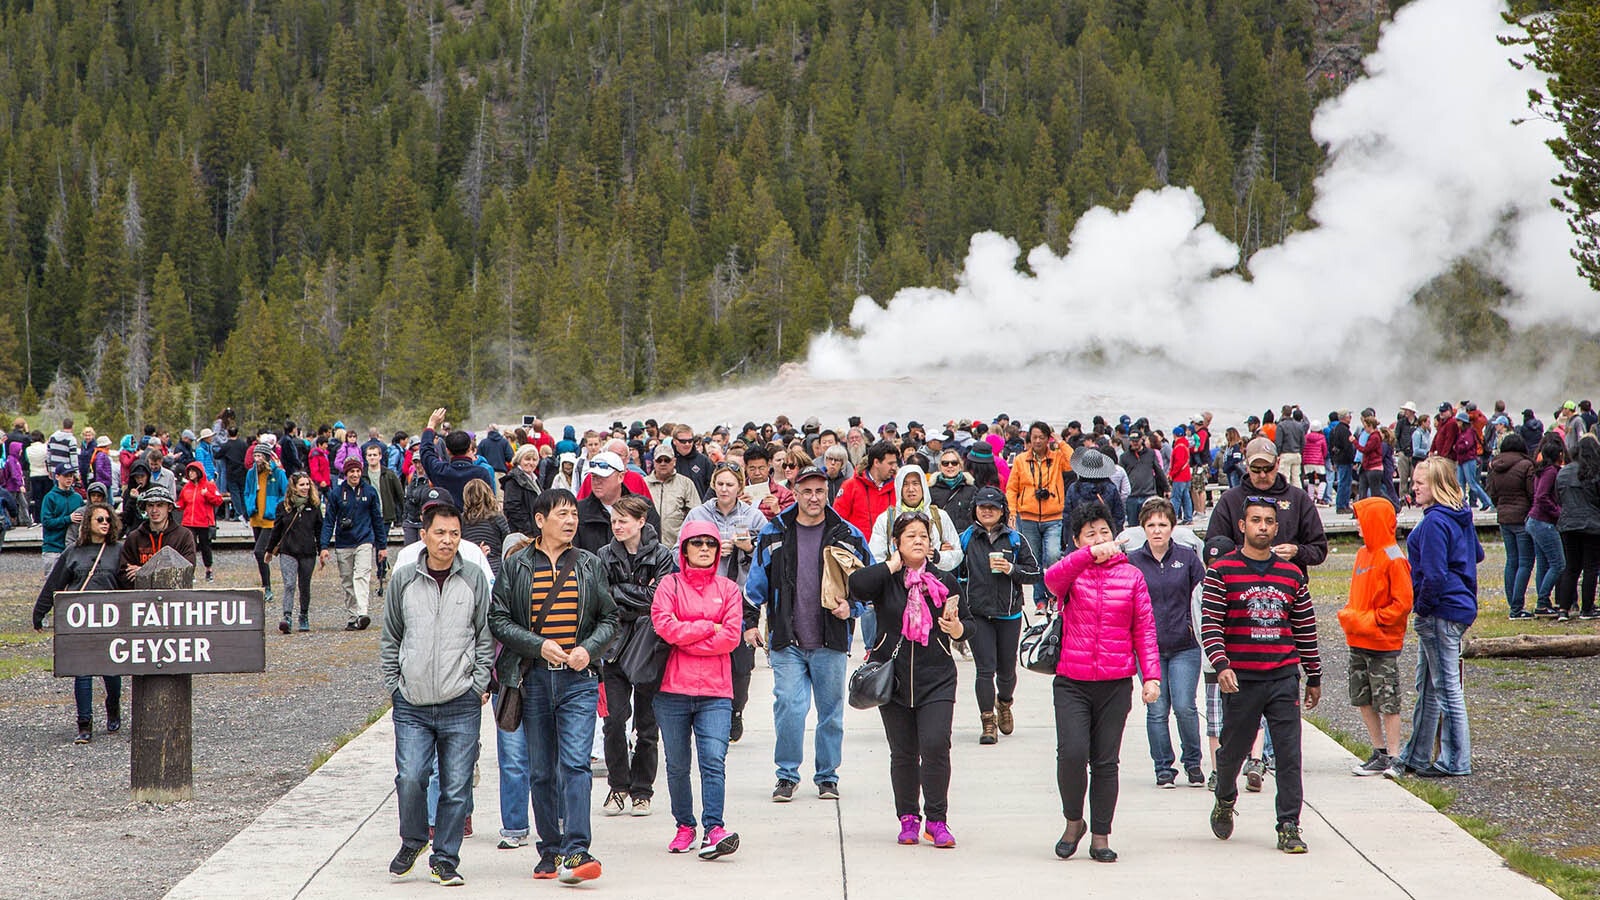 A visit to Yellowstone National Park is a bucket-list item for Chinese tourists visiting the United States for the first time. Many don't know about Wyoming, but they know Yellowstone.